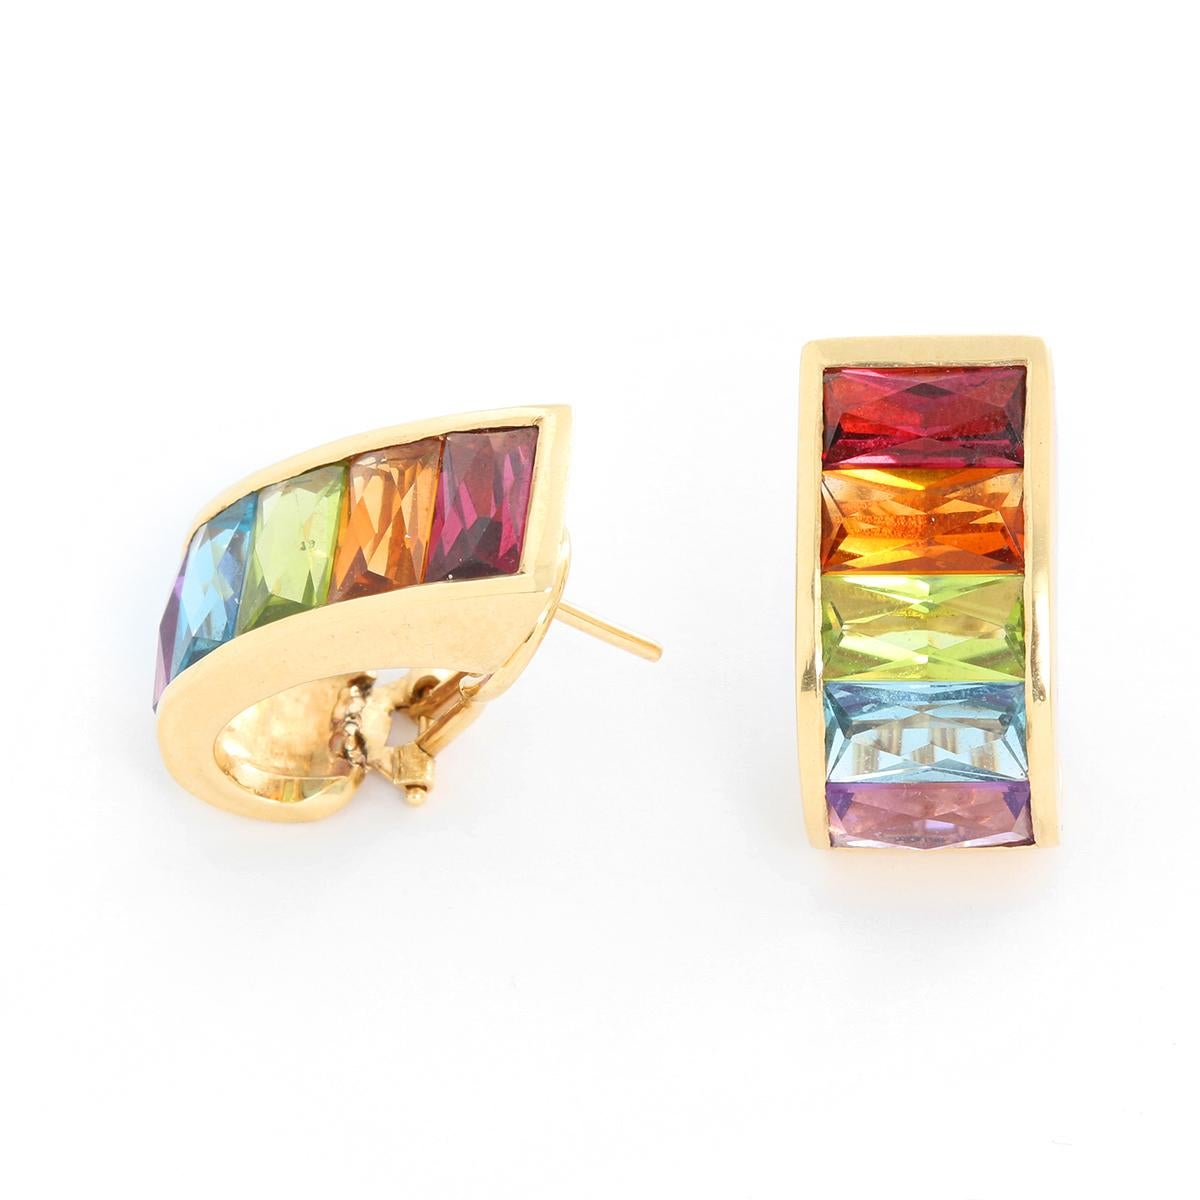 H. Stern Rainbow 18K Yellow Gold Earrings - H. Stern earrings are crafted in 18k yellow gold and set with faceted rectangular-cut gemstones of an estimated 10.10 carats - amethyst (about 1.85 carats), blue topaz (about 2.30 carats), peridot (about